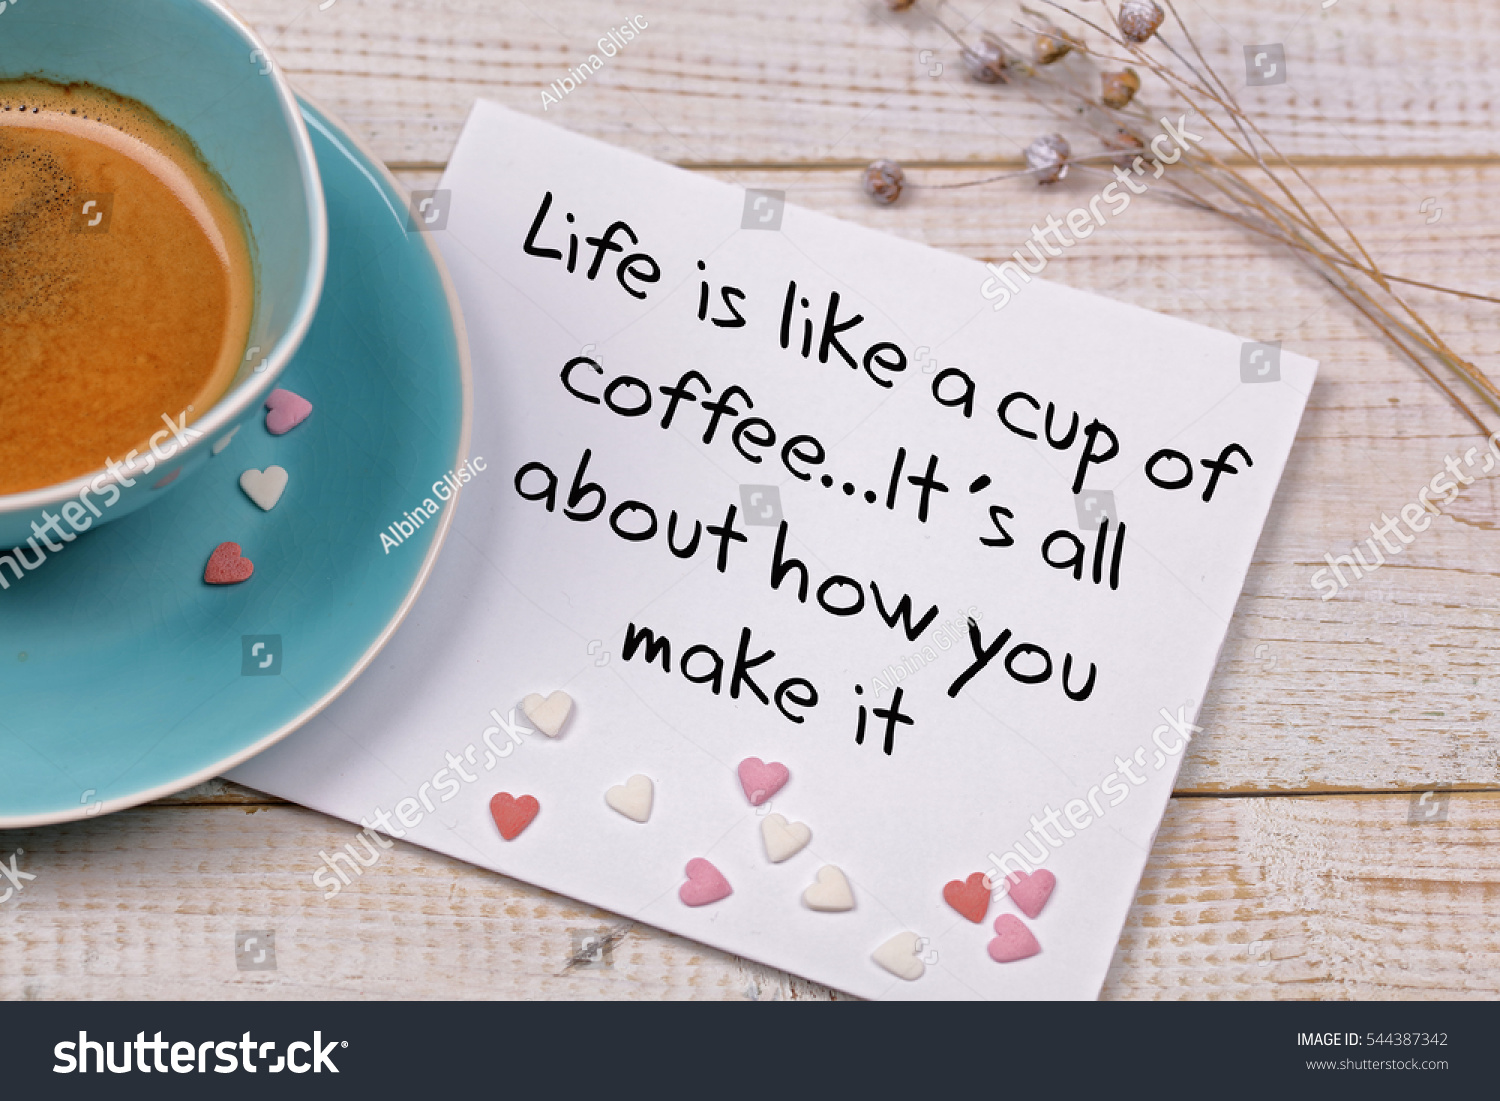 Inspiration motivation quote Life is like a cup of coffee Happiness New beginning